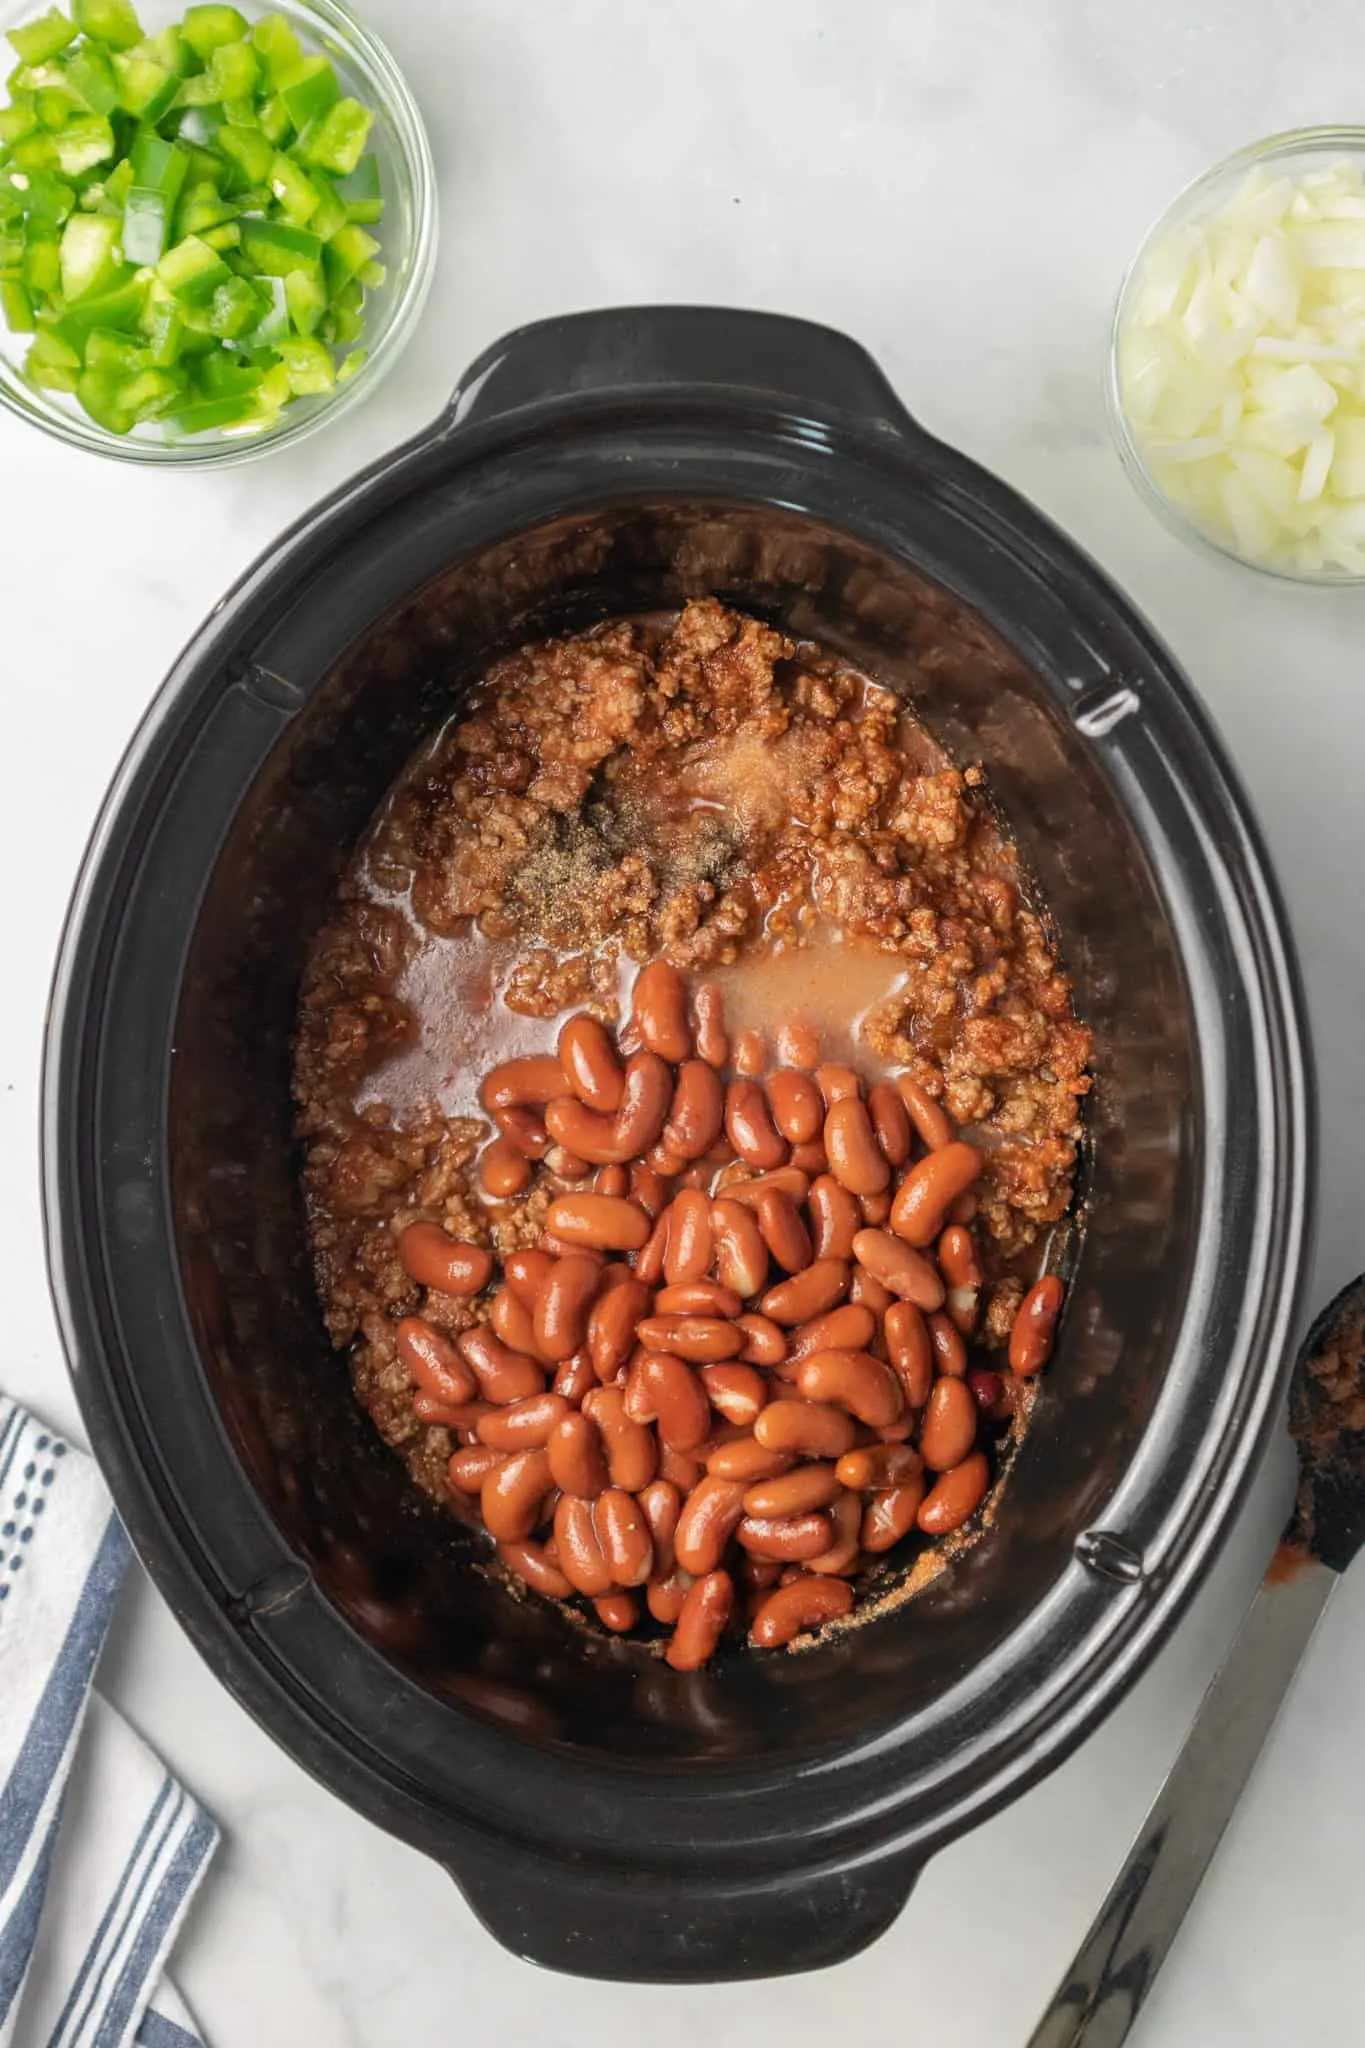 kidney beans on top of spices, ground beef and tomato sauce in a crock pot